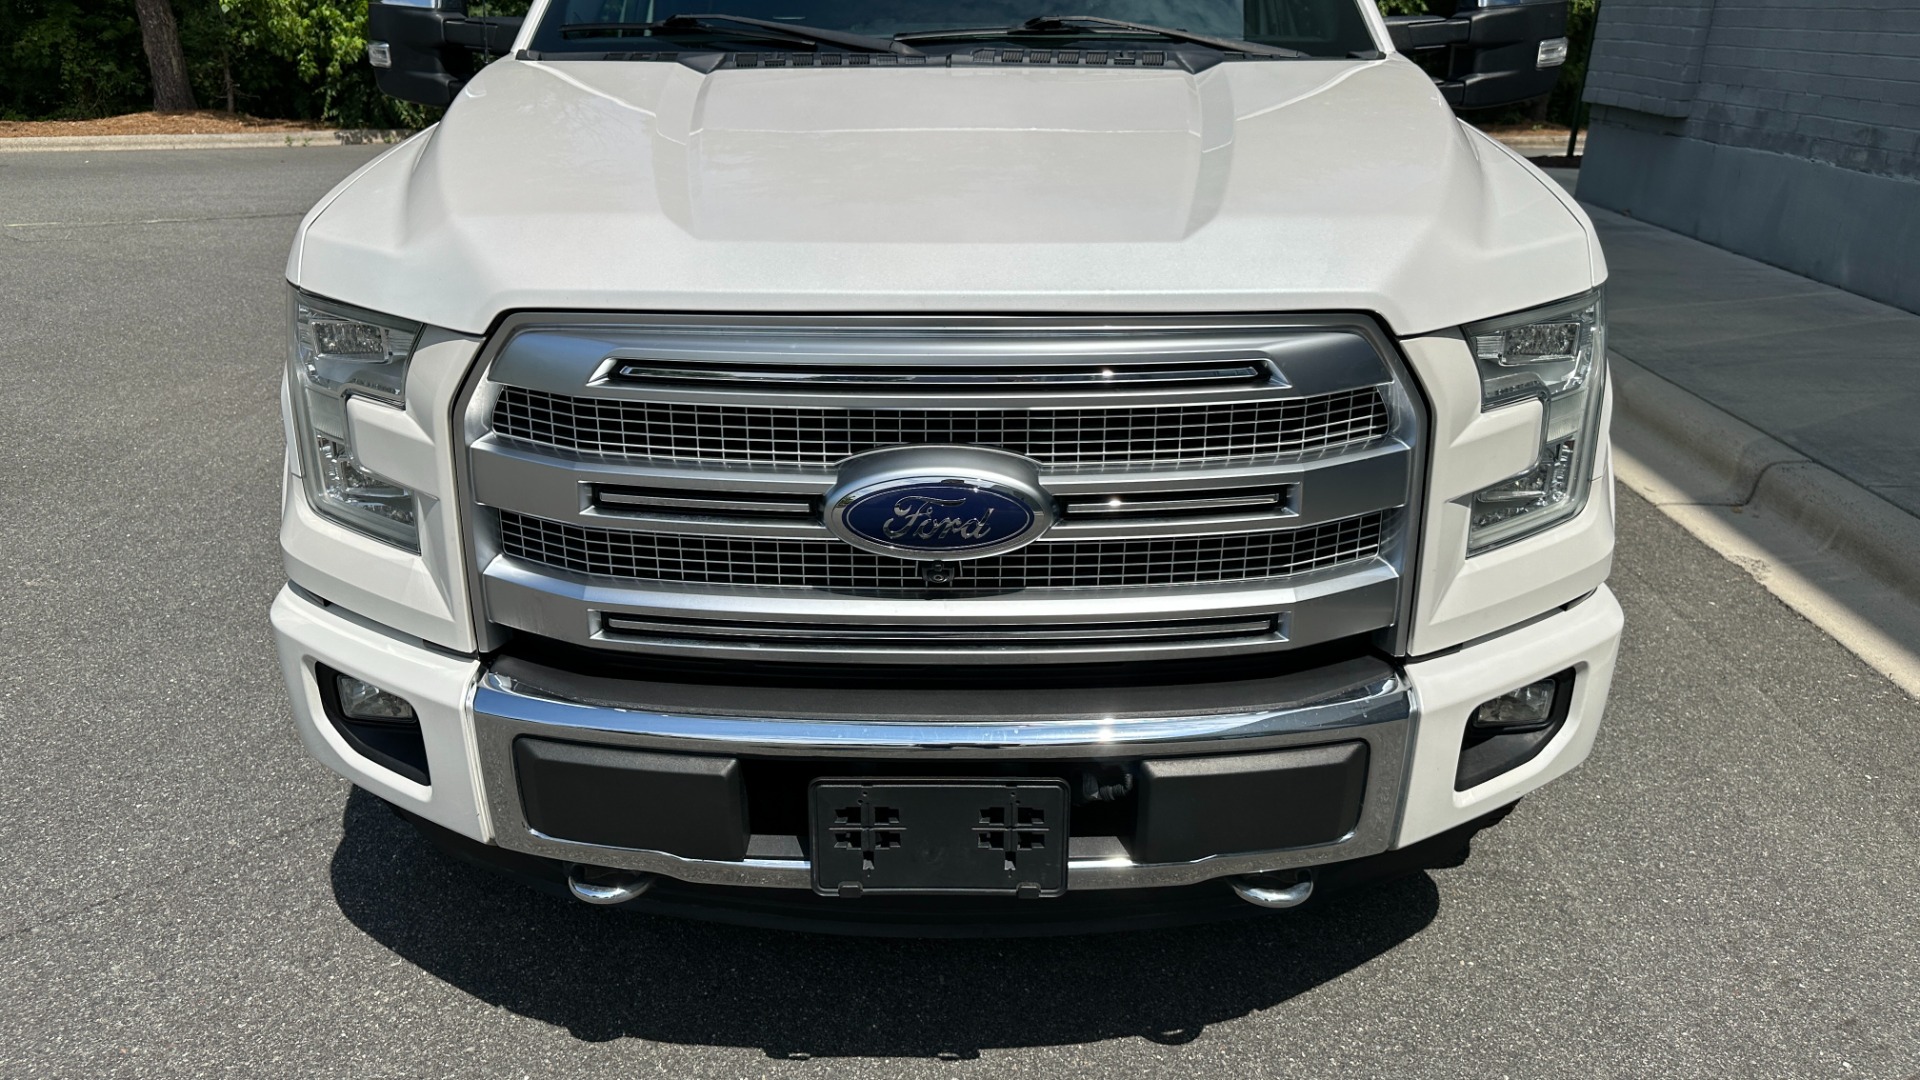 Used 2016 Ford F-150 PLATINUM / TECH PKG / BED COVER / LEATHER INTERIOR for sale $35,000 at Formula Imports in Charlotte NC 28227 8